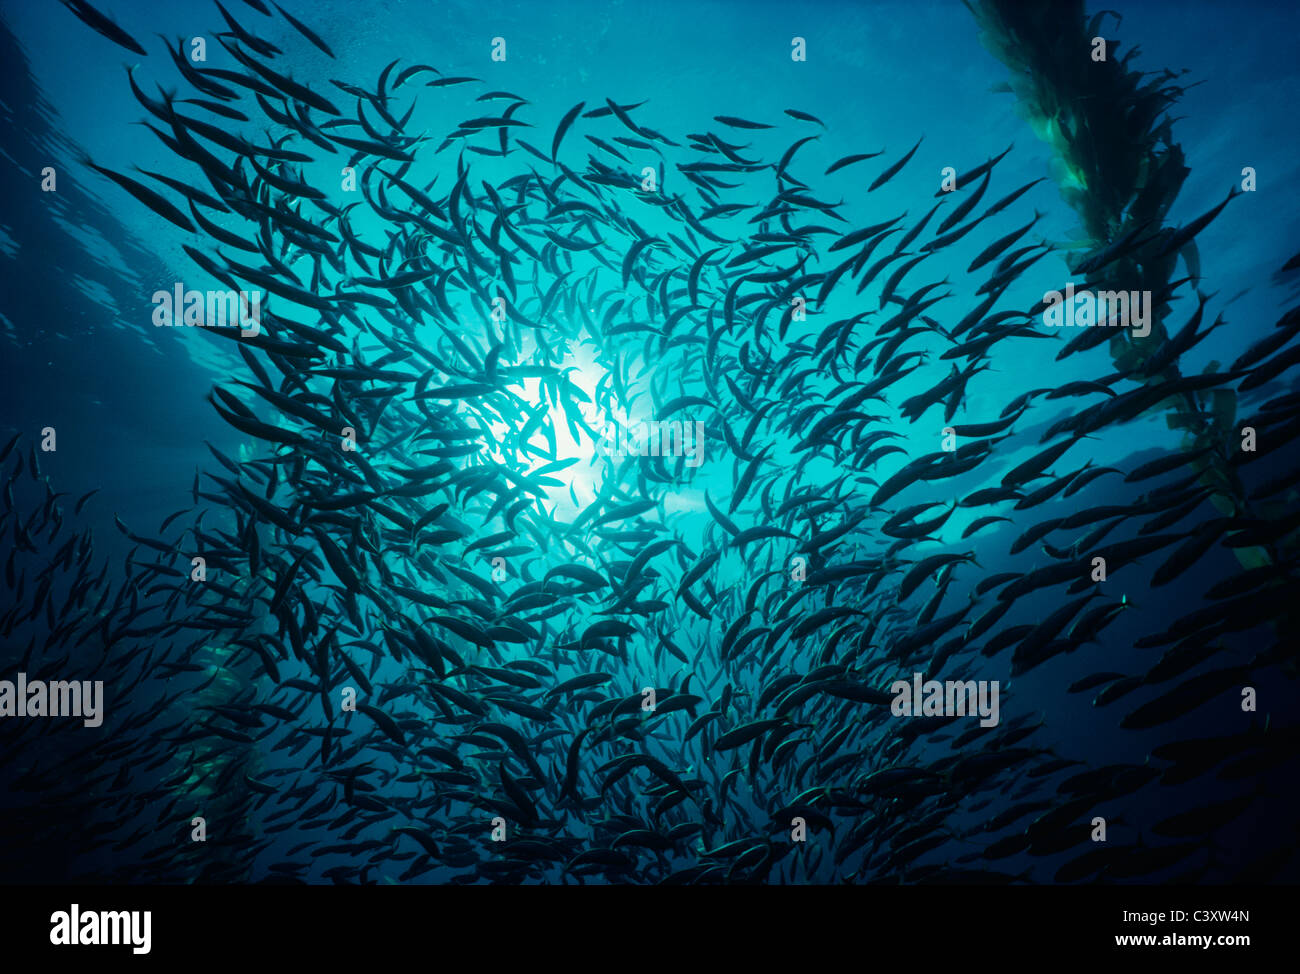 Pacific Mackerel (Scomber japonicus) schooling in giant Kelp Forest (Macrocystis pyrifera). Channel Islands, Southern California Stock Photo